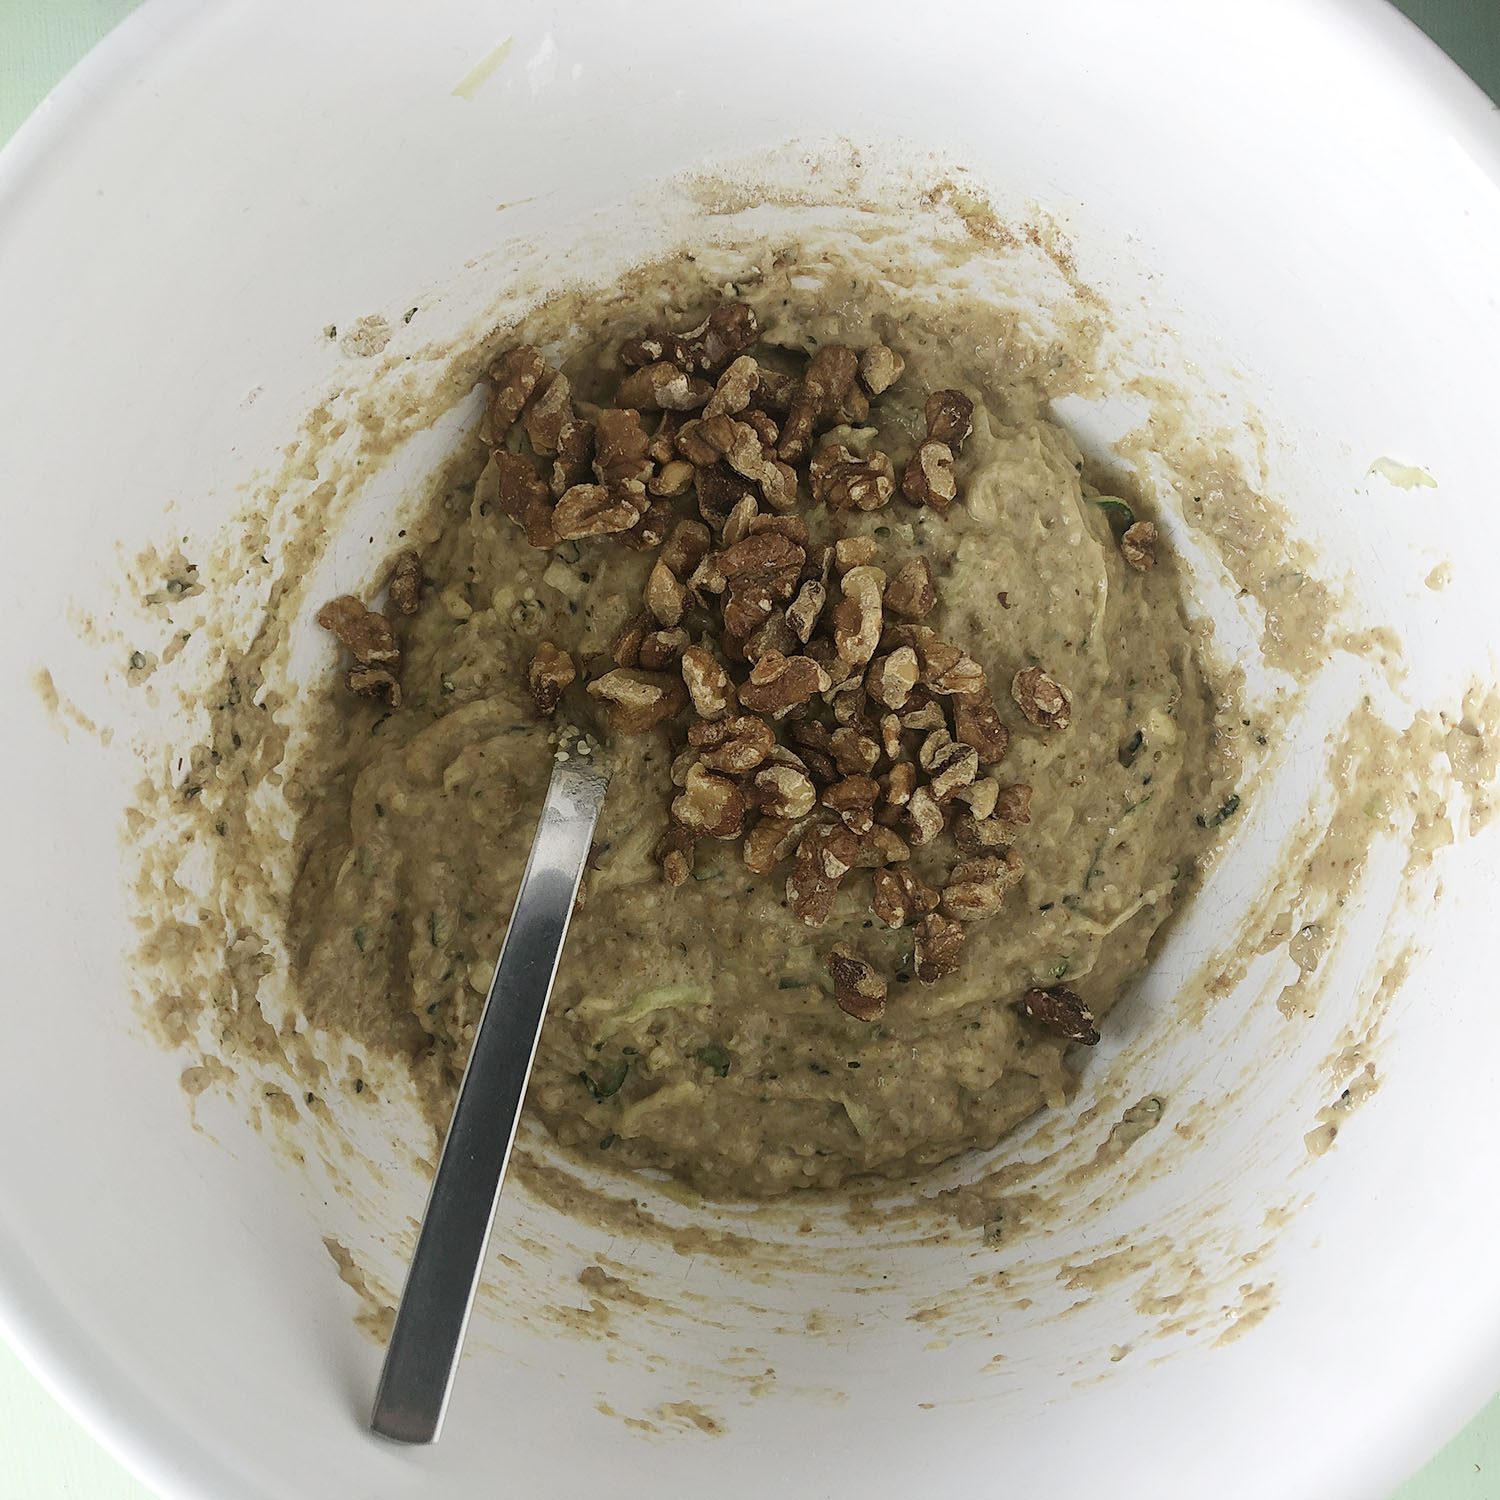 Top-down view of white mixing bowl with walnuts, zucchini and other ingredients for making Zucchini Chocolate Chunk Muffins